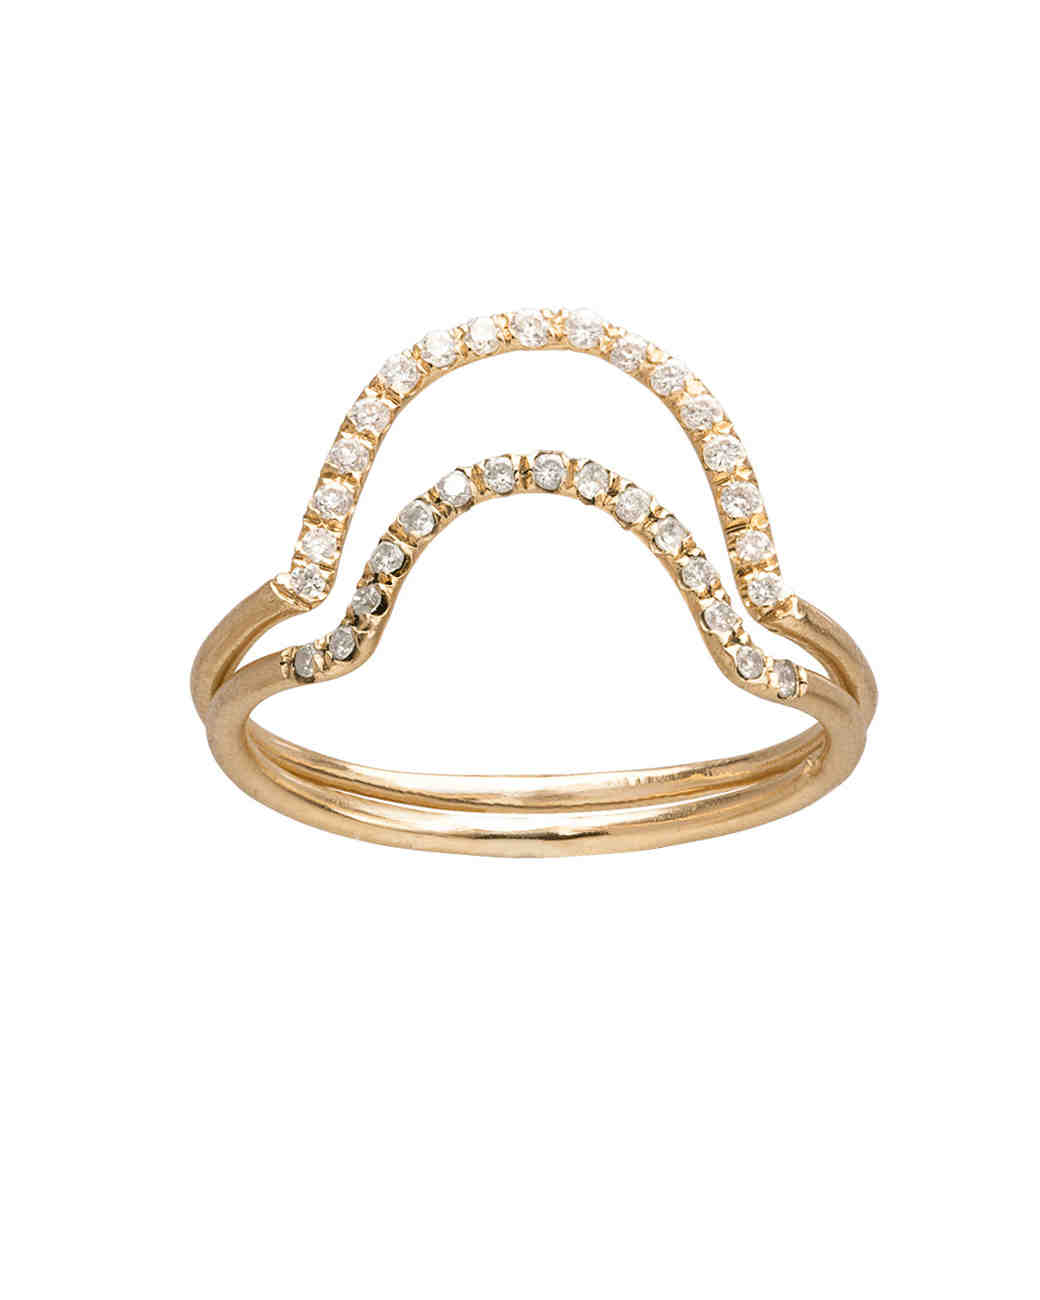 Stacked Engagement Rings You'll Love | Martha Stewart Weddings